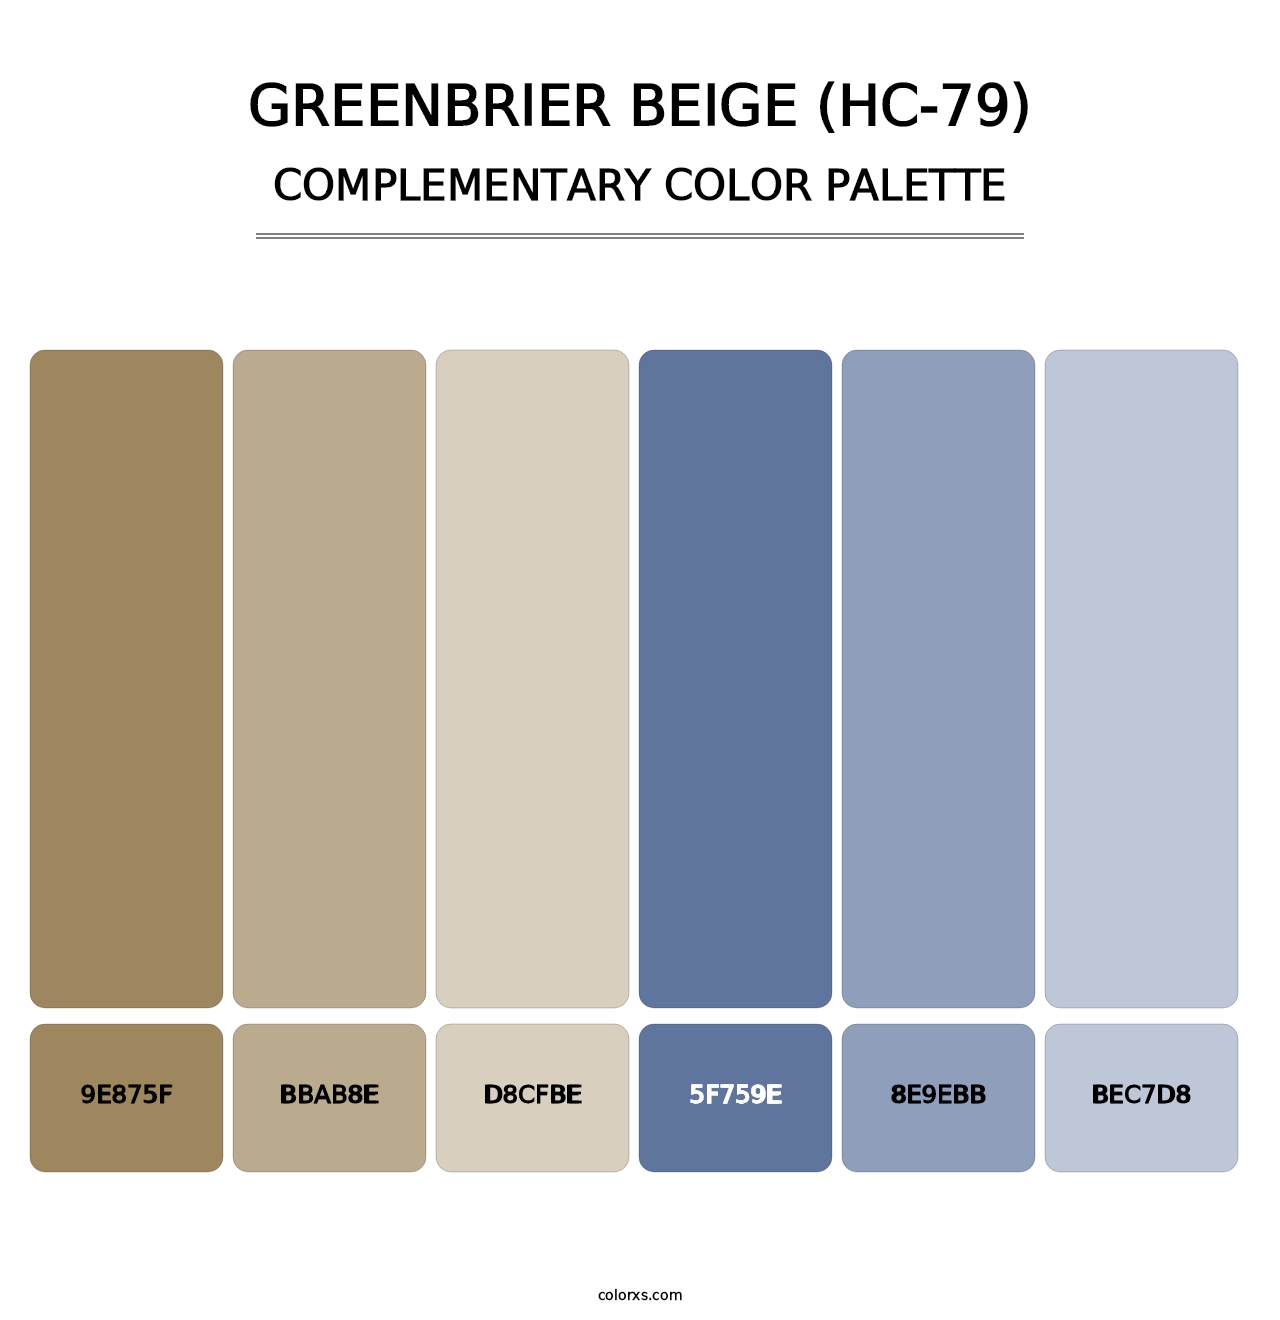 Greenbrier Beige (HC-79) - Complementary Color Palette